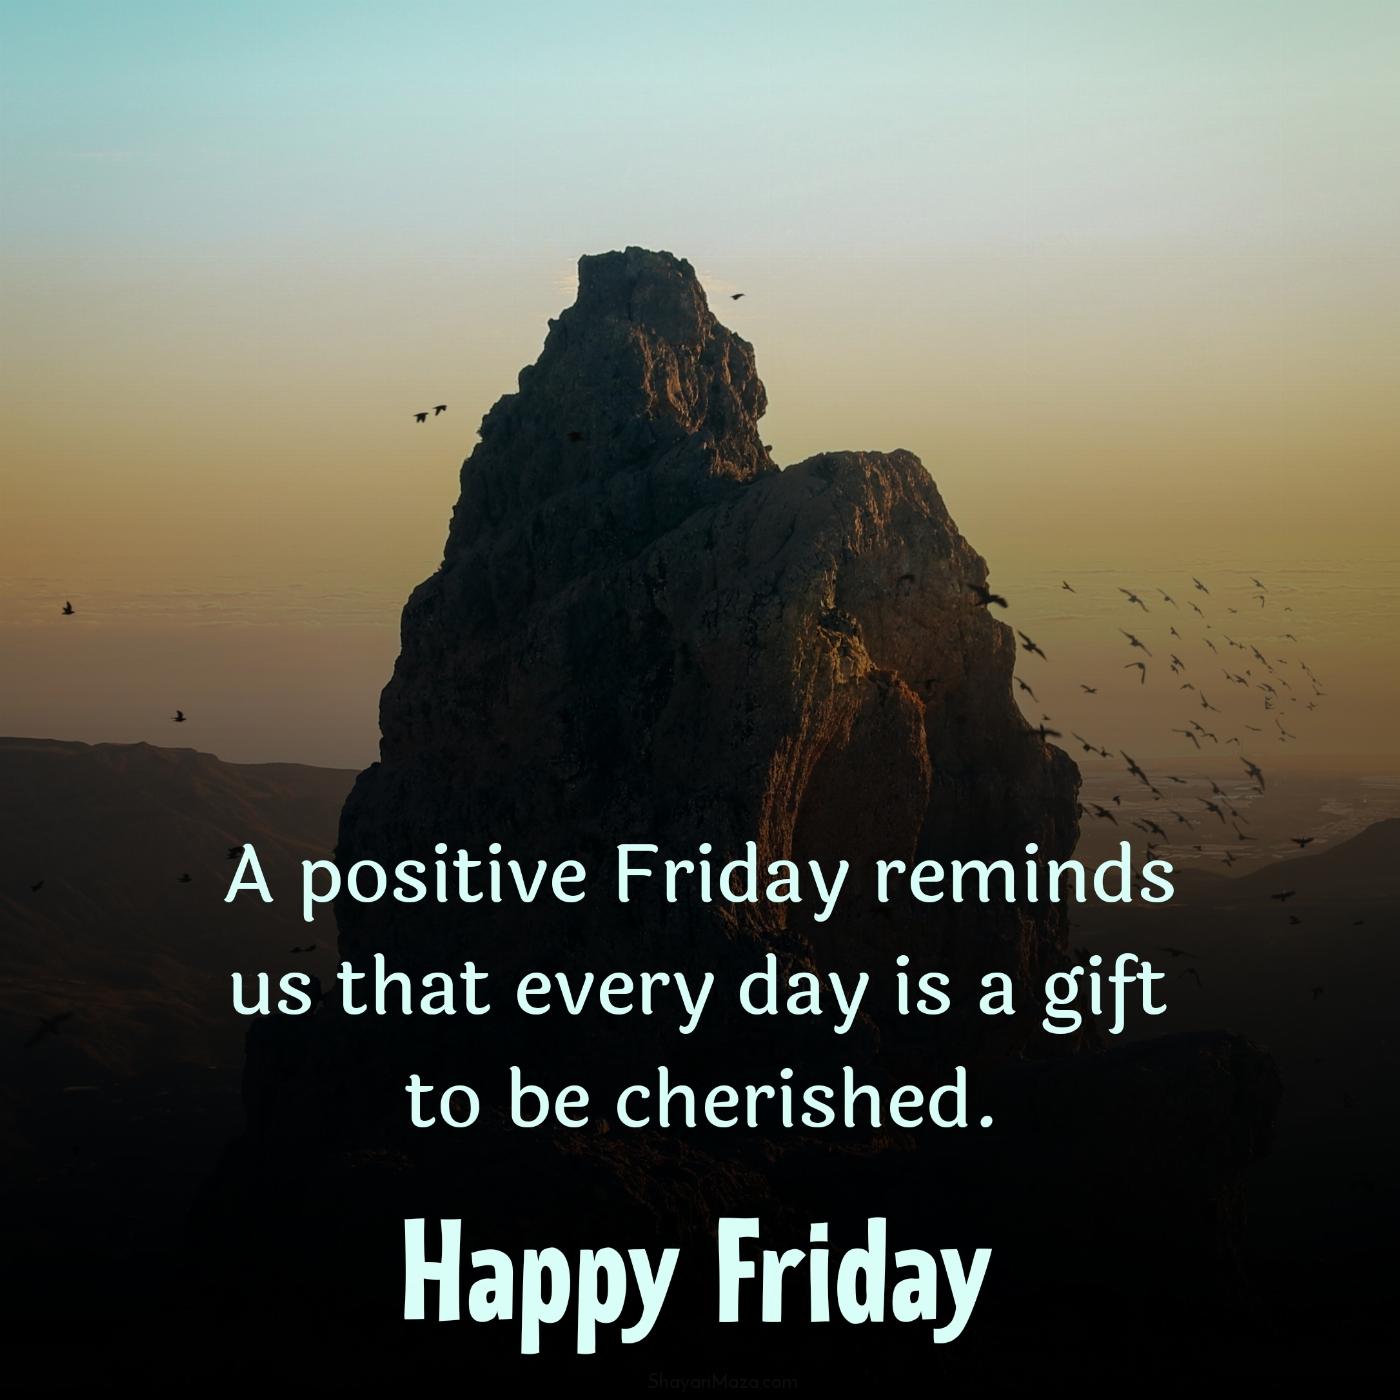 A positive Friday reminds us that every day is a gift to be cherished